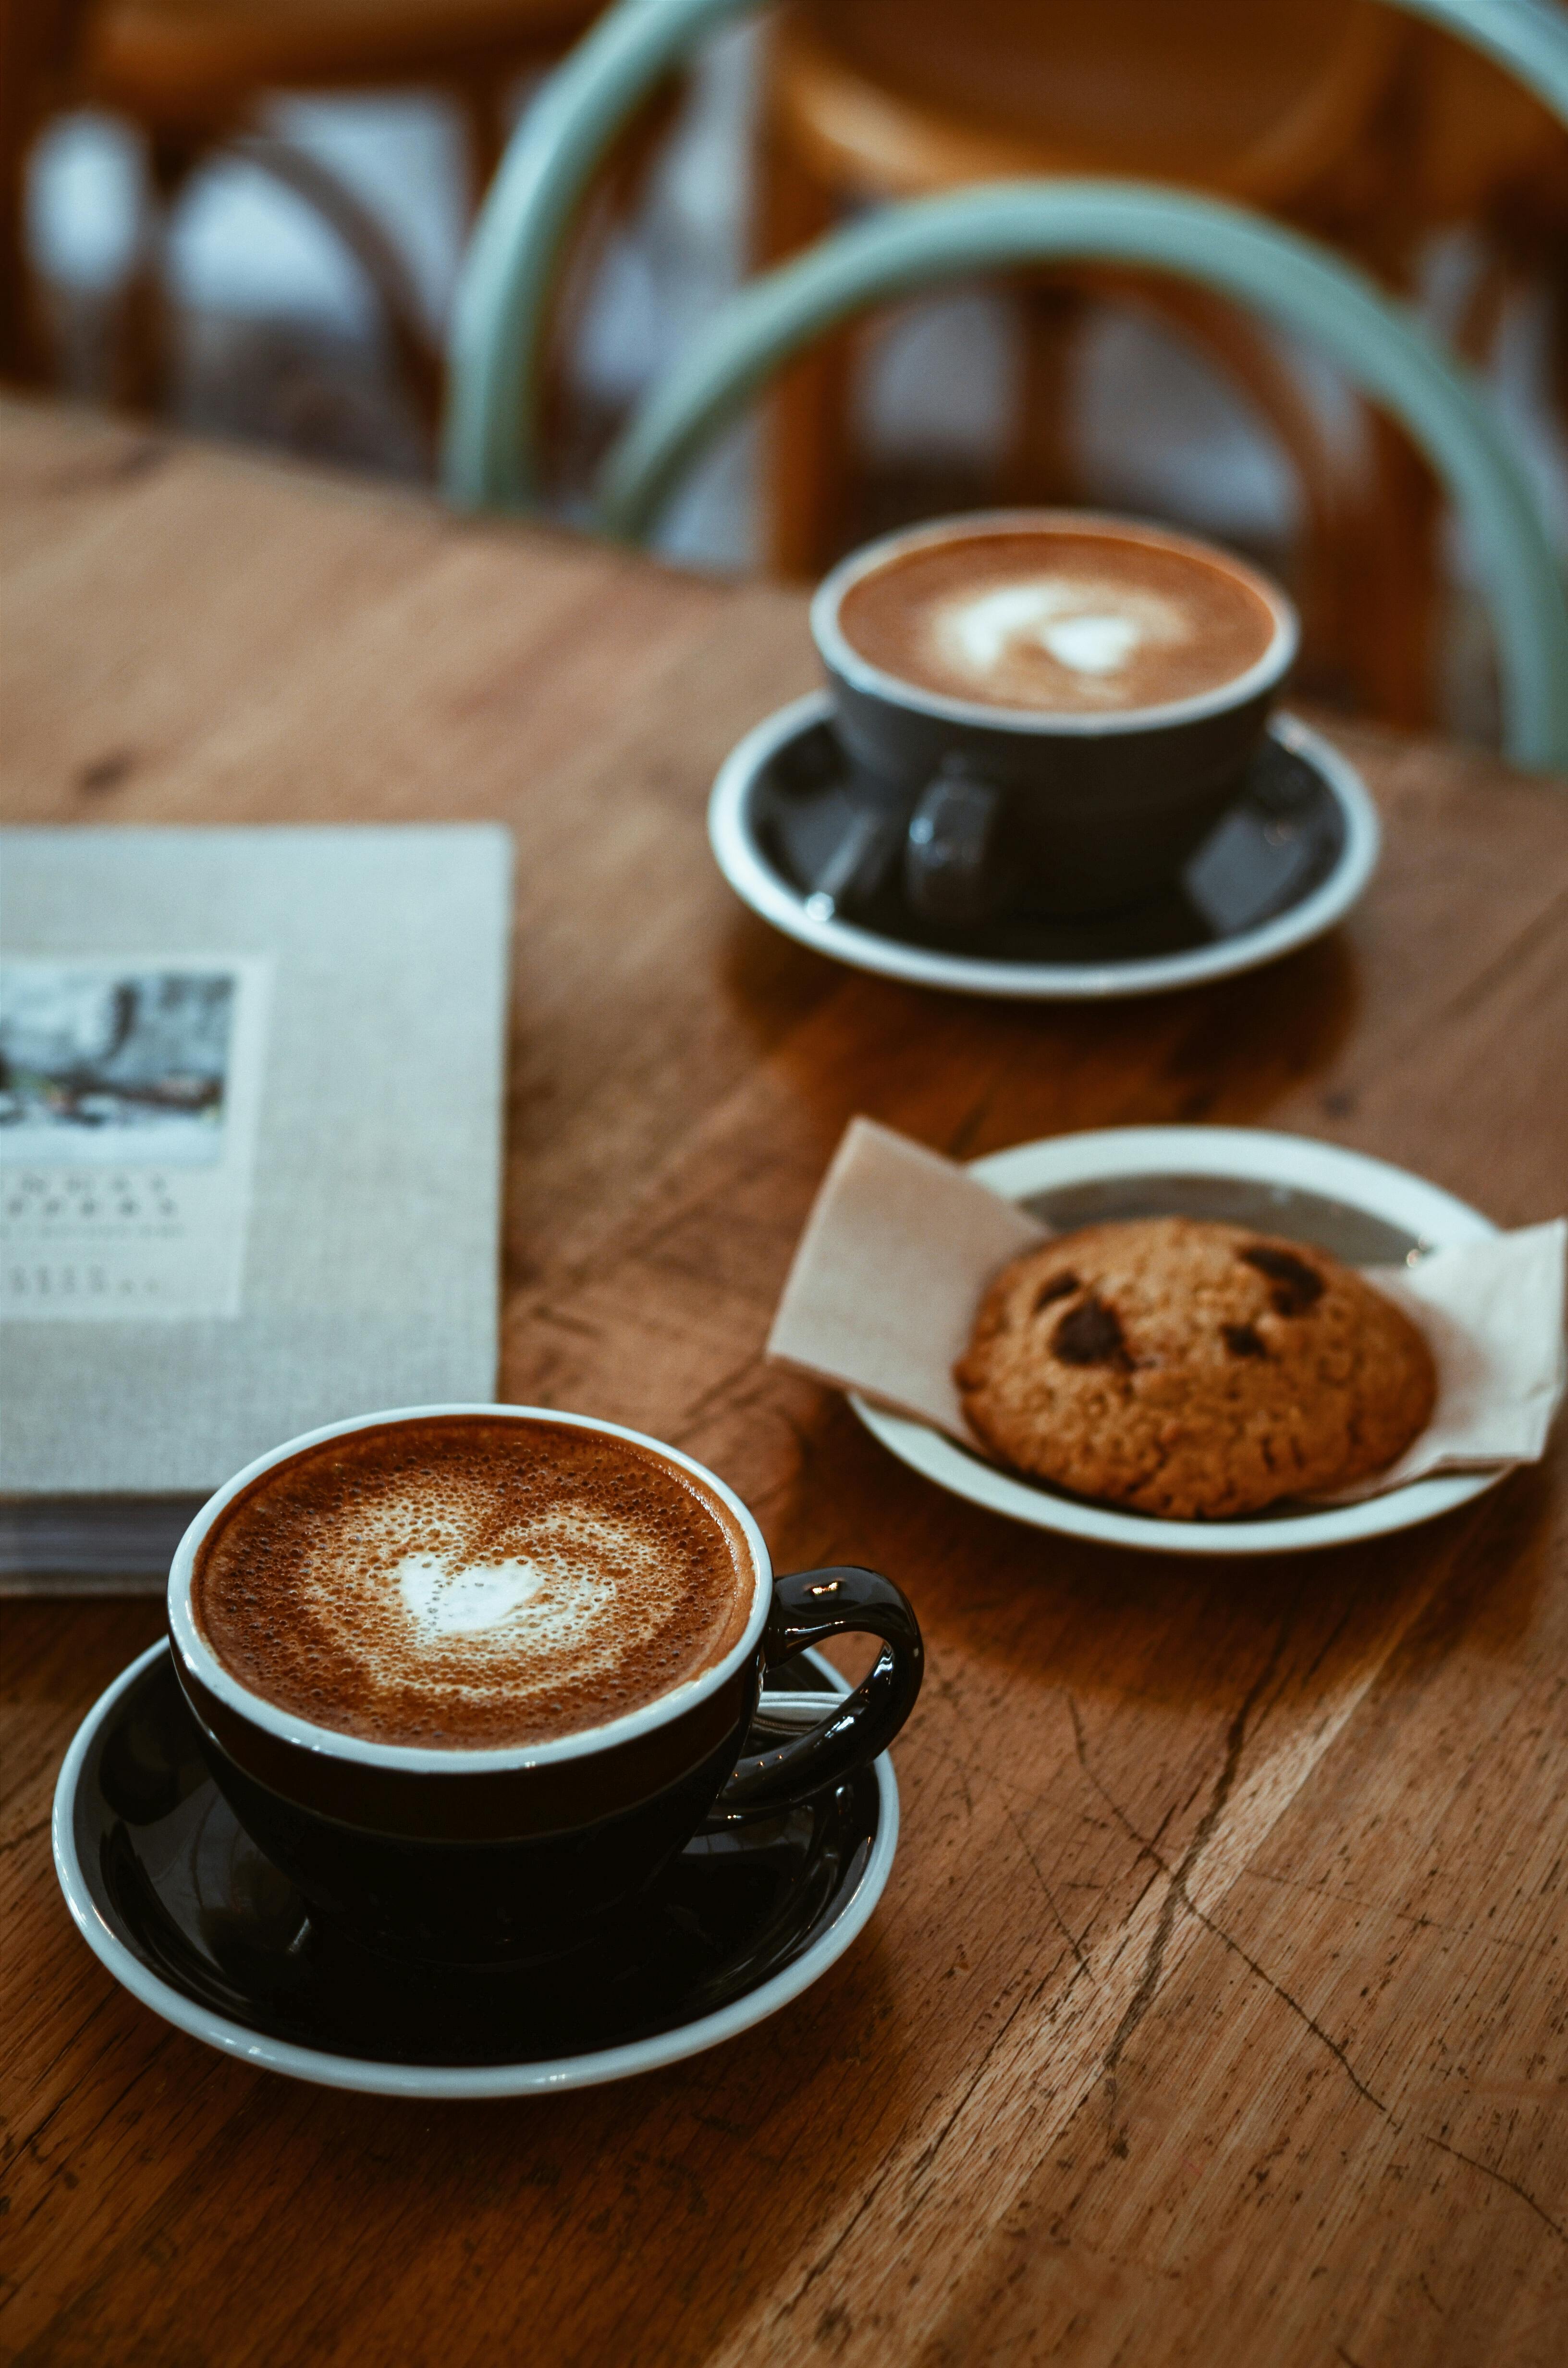 Two cups of coffee and a cookie | Source: Pexels